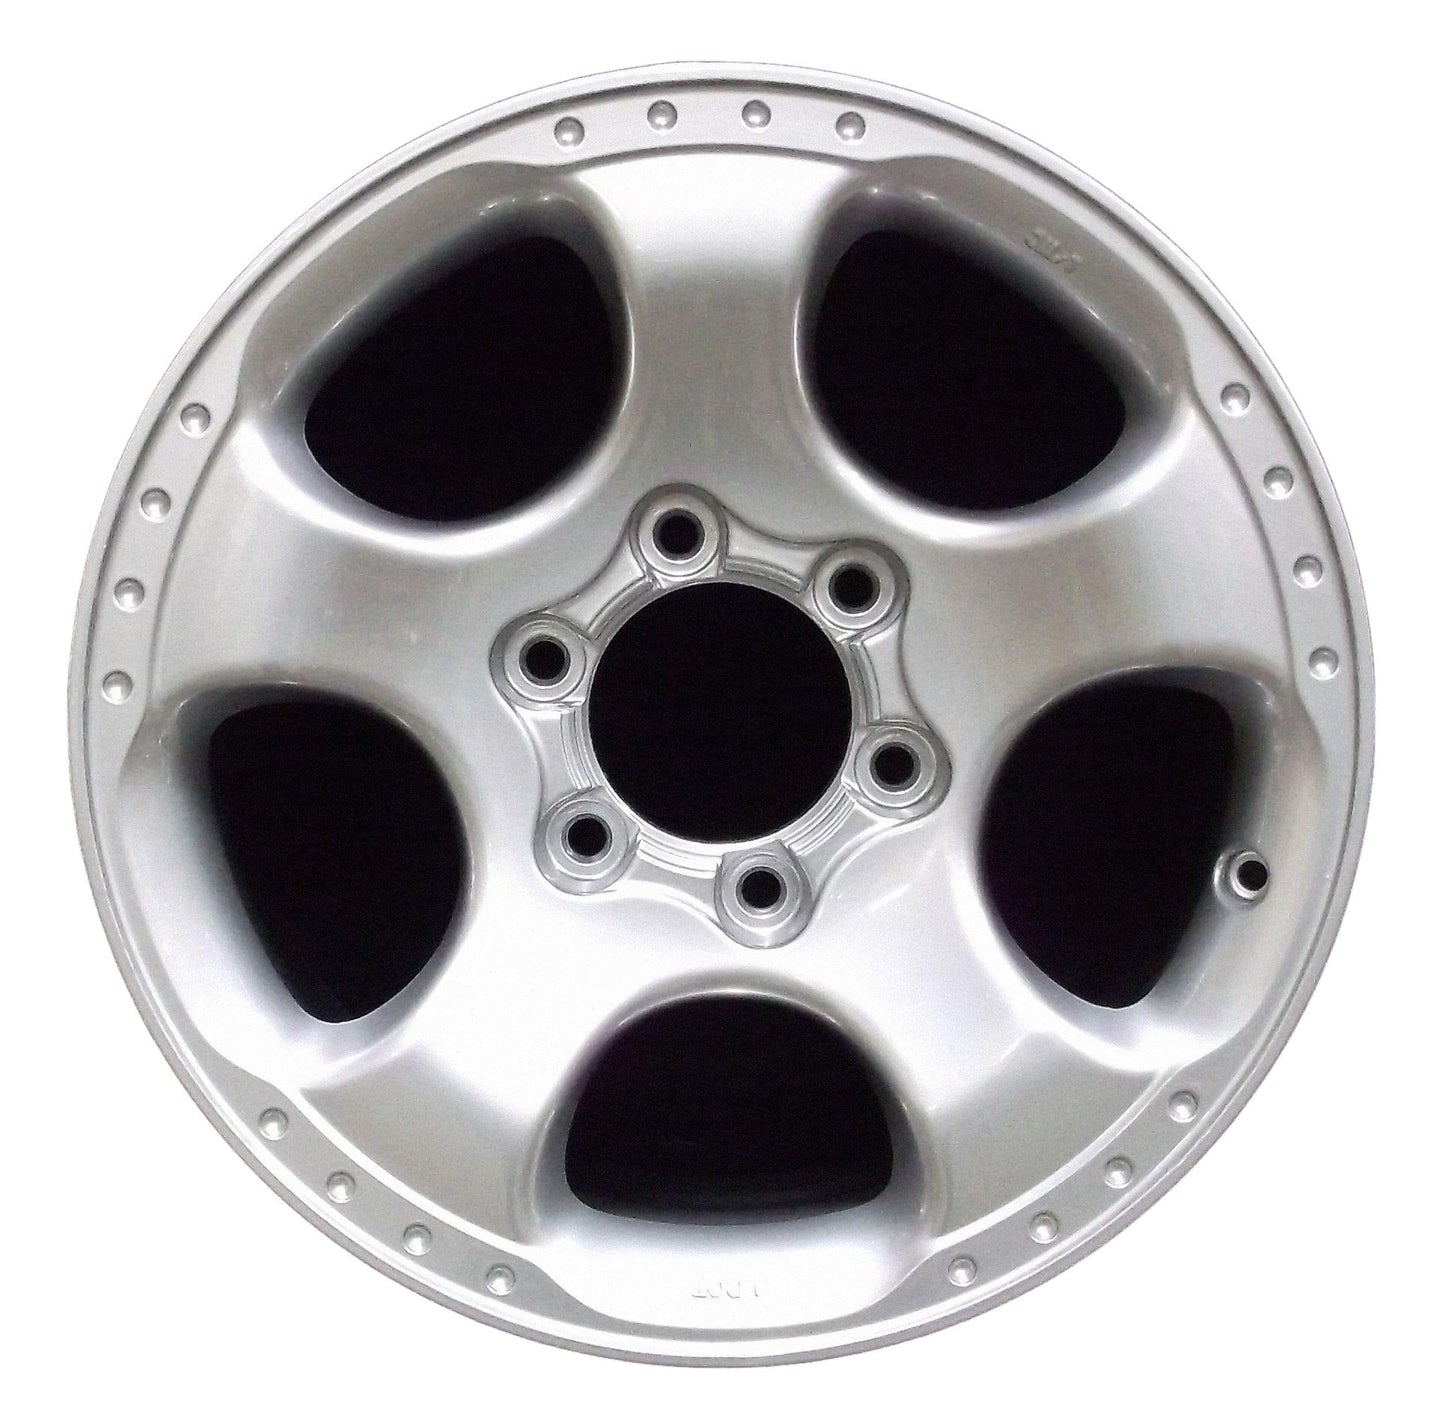 Nissan Frontier  2001, 2002, 2003, 2004 Factory OEM Car Wheel Size 17x8 Alloy WAO.62441.PS11.FF